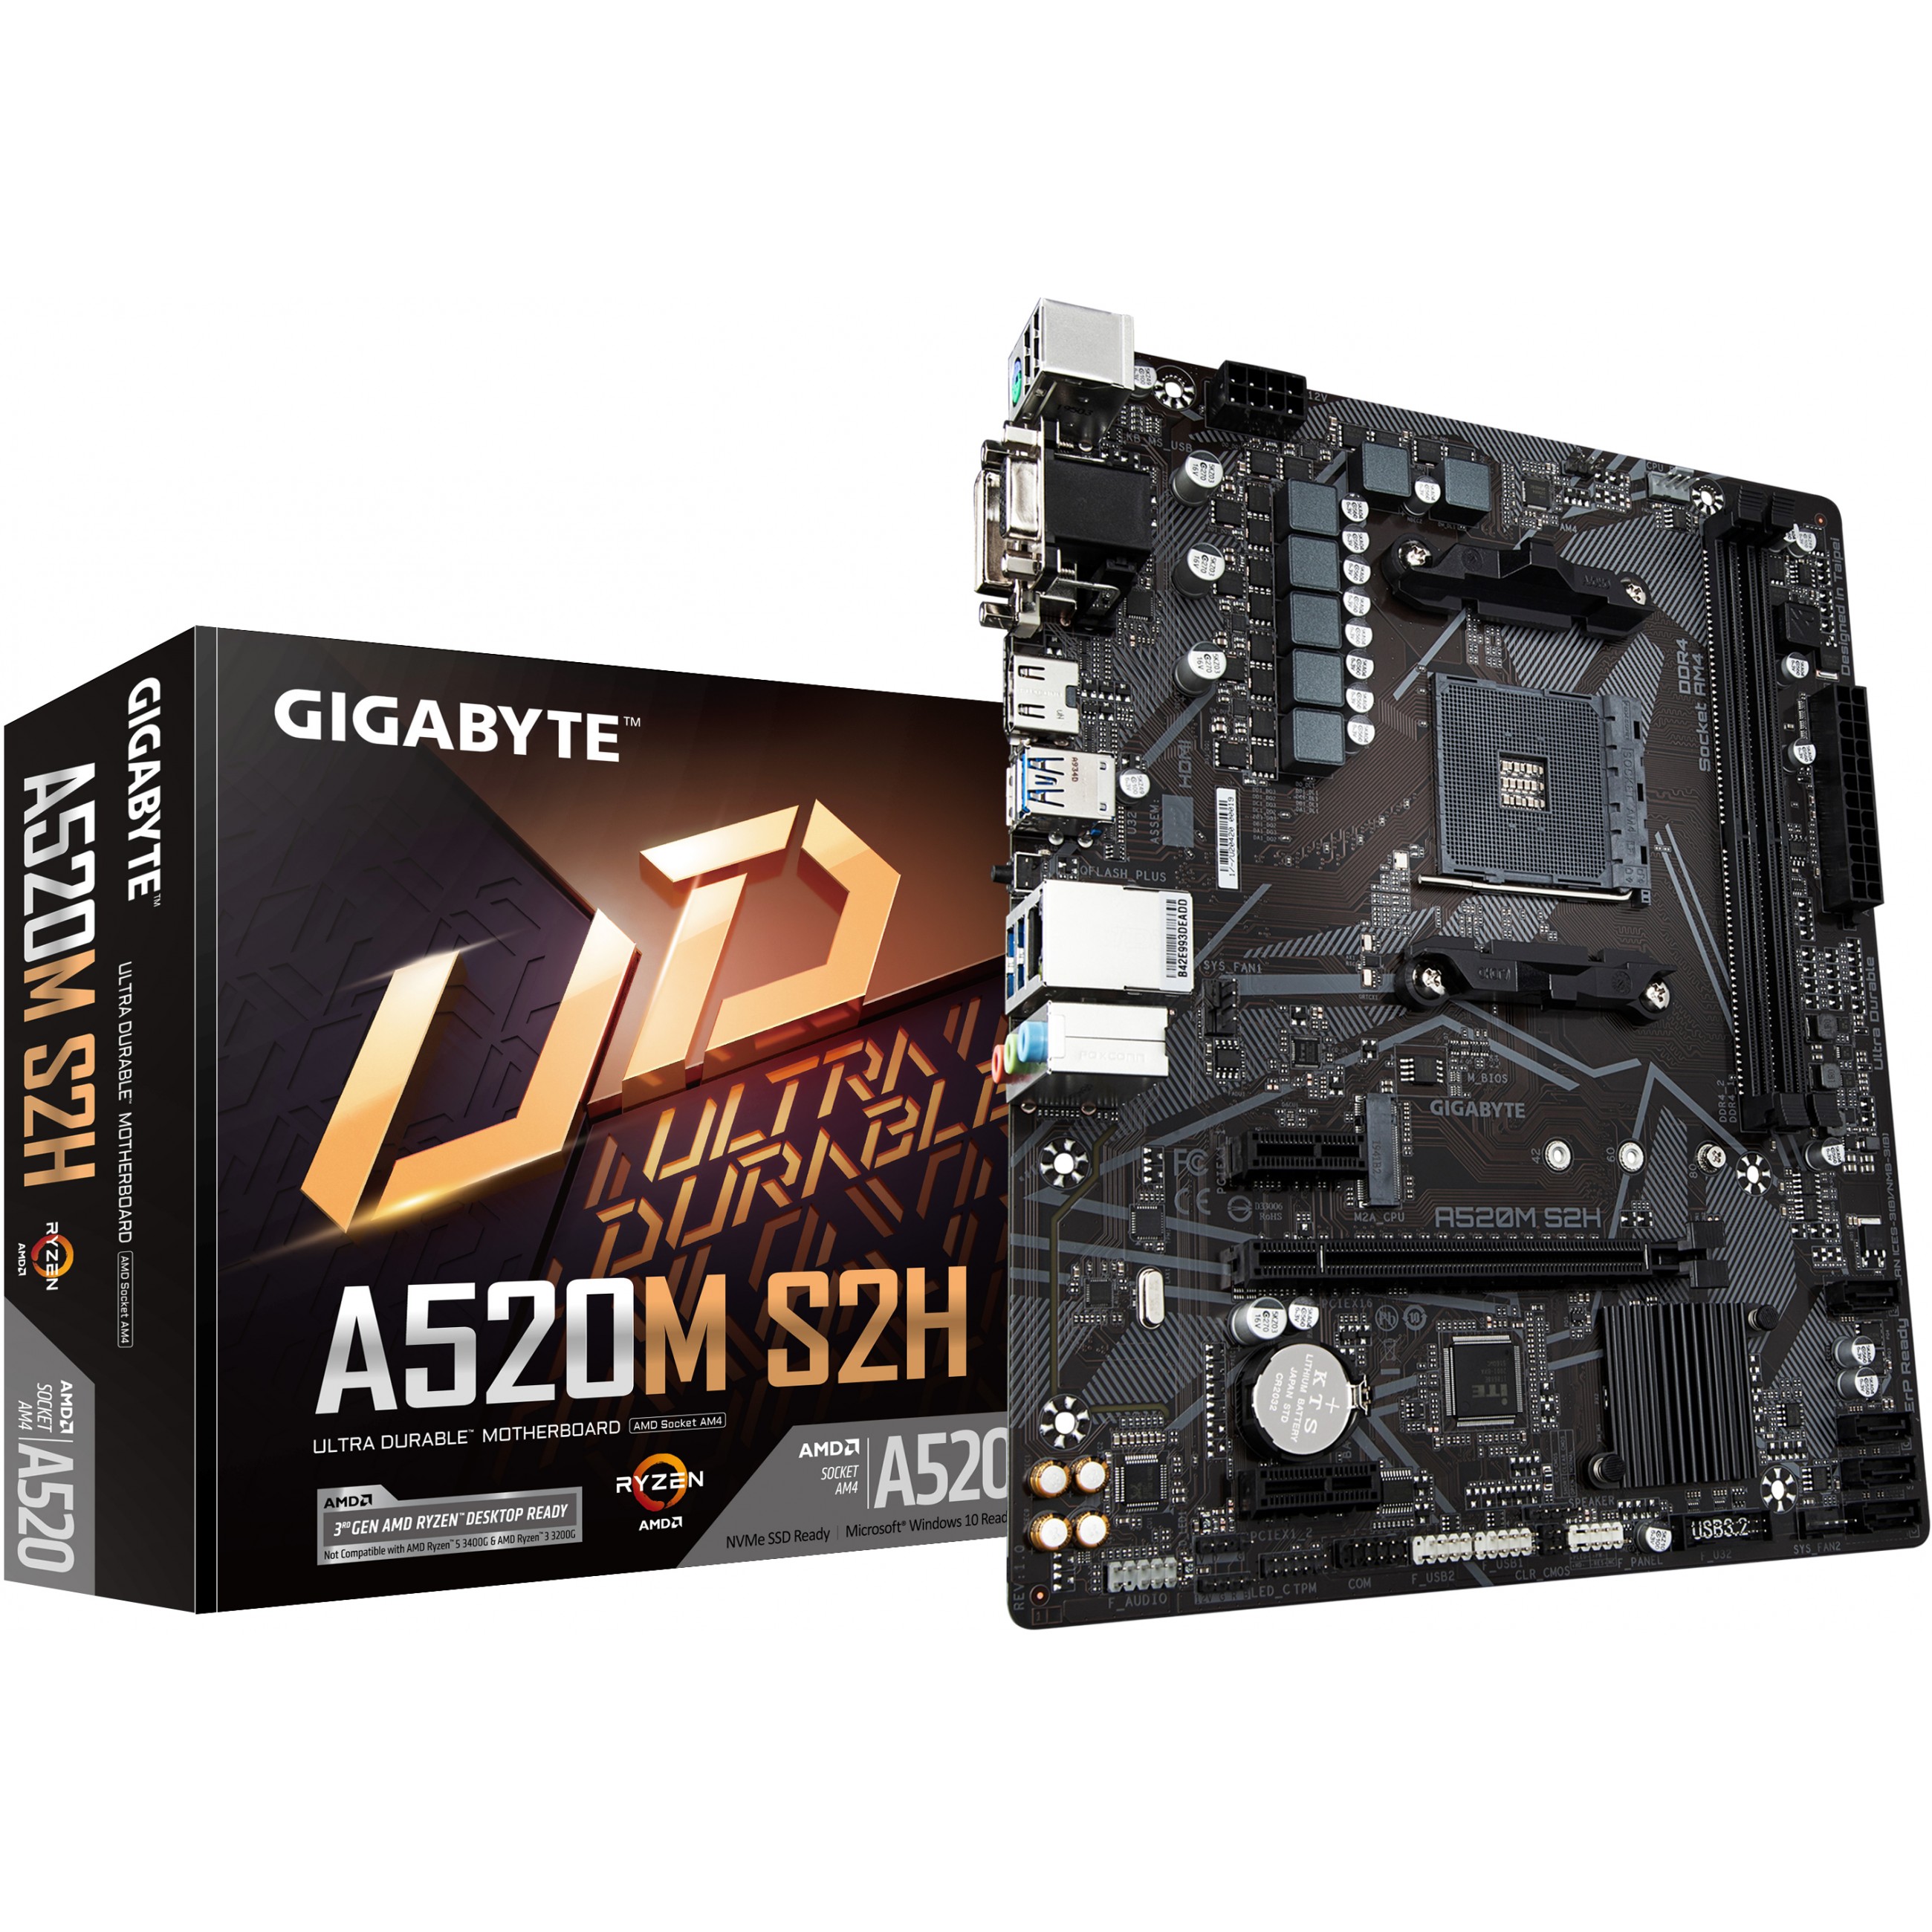 Gigabyte A520M S2H motherboard - A520M S2H